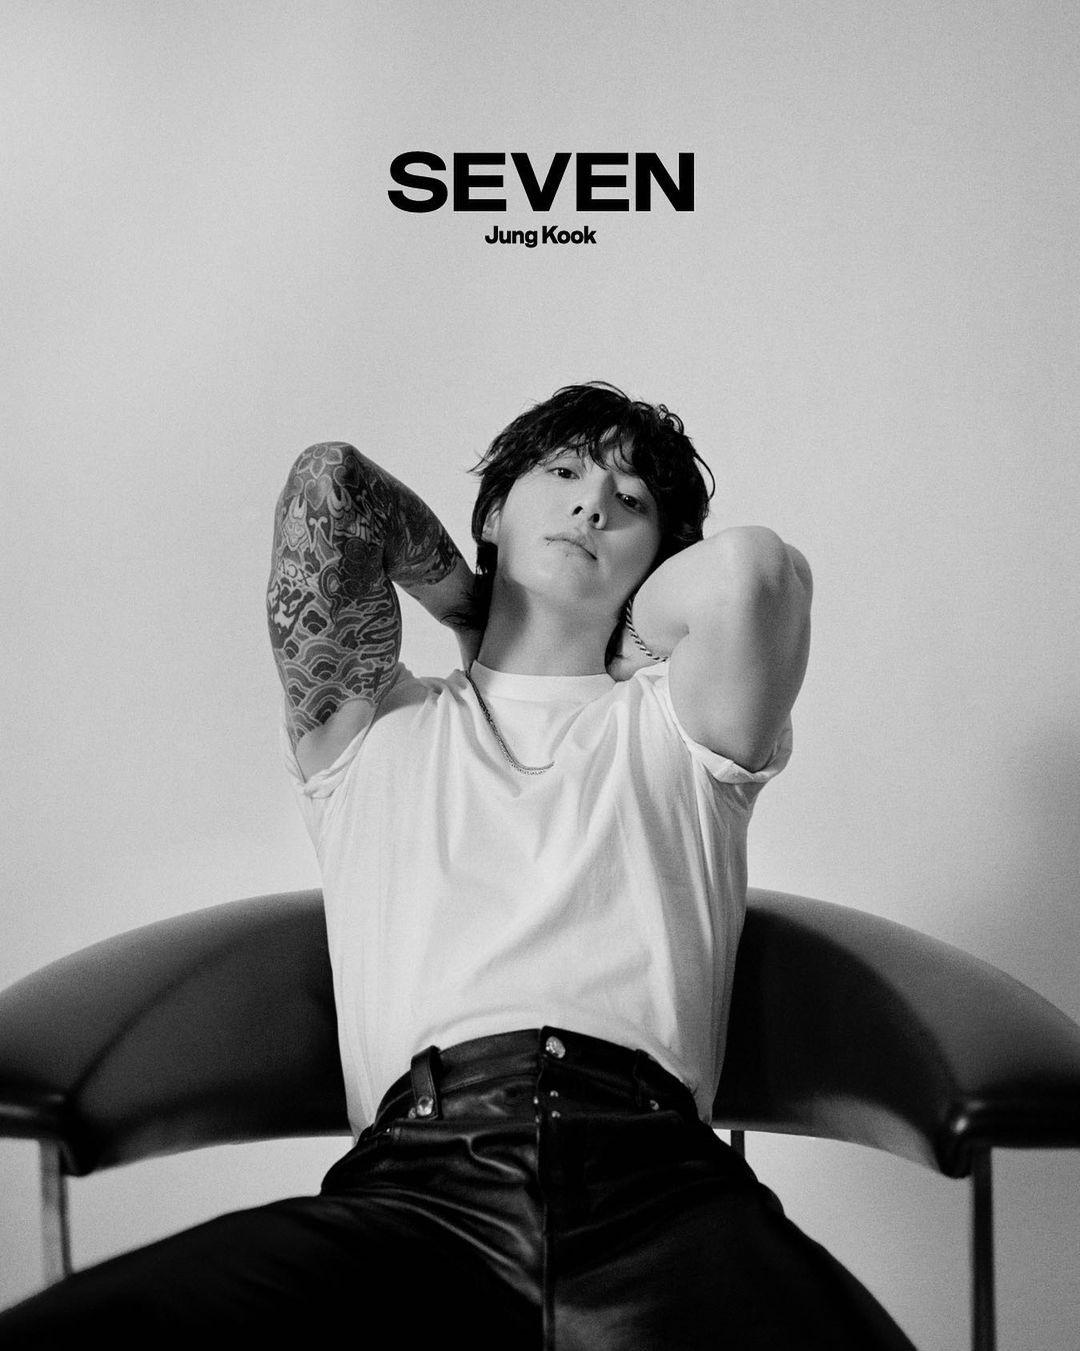 Jungkook flaunts his sleeve tattoo in this black and white picture, wearing a tee and leather pants.